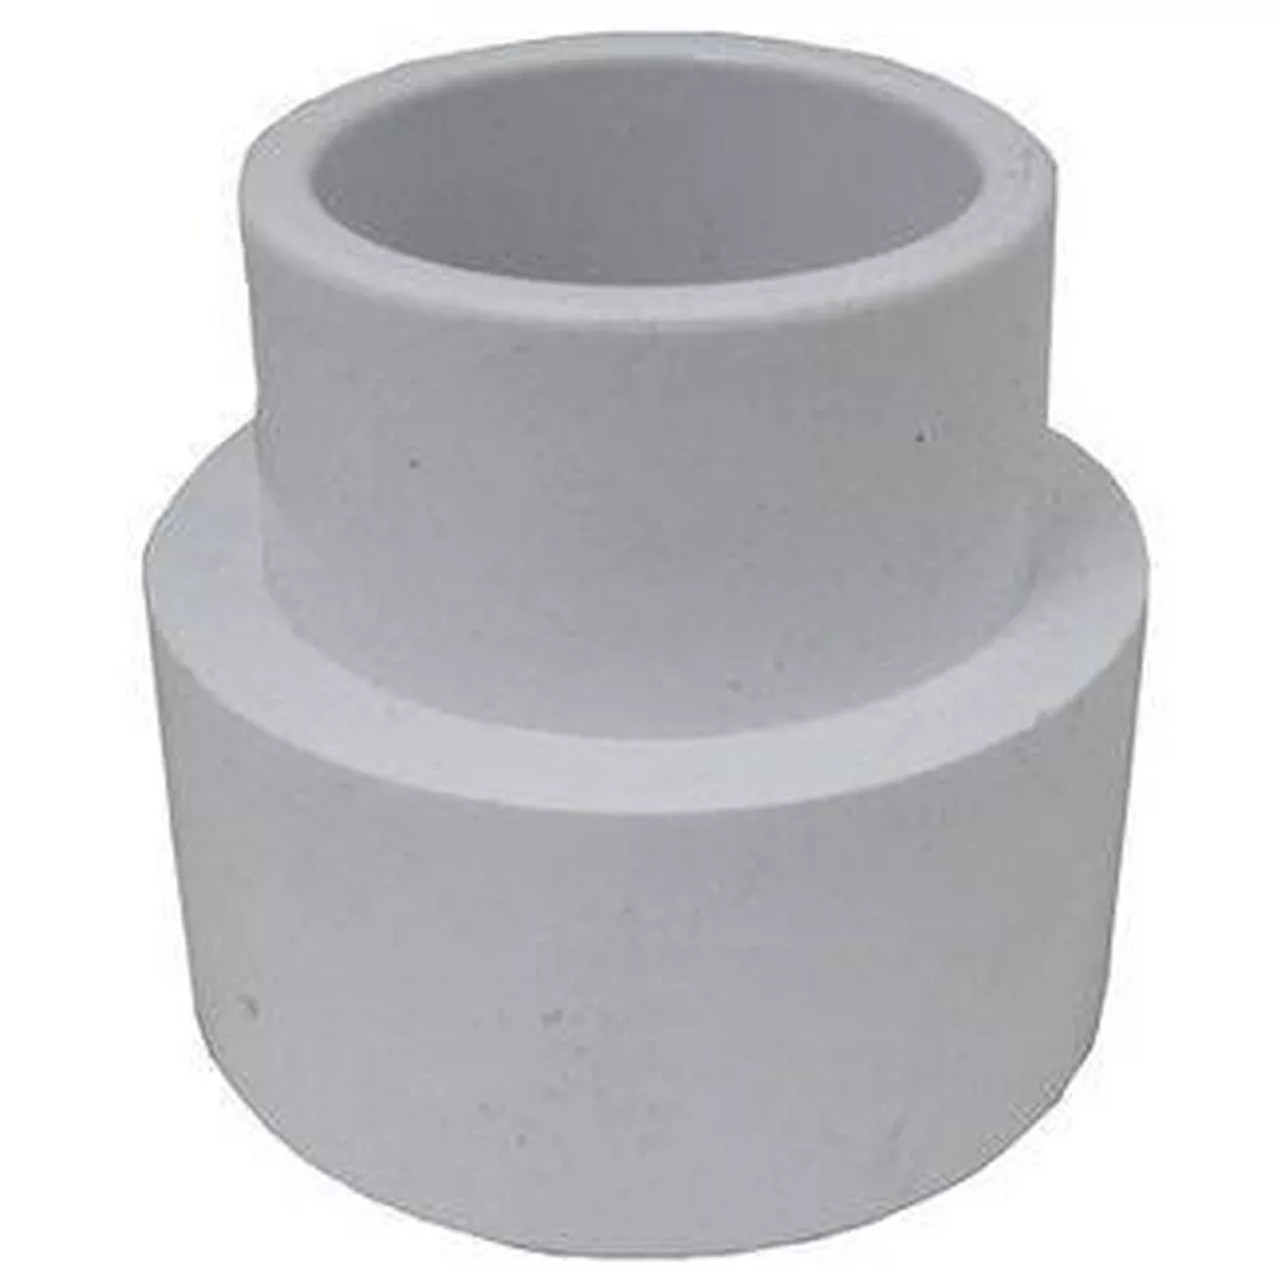 1.5", PVC, Pipe, Extender, Fitting, schedule, sch, 40, SP0301-15, 21181-150-000, 0301-15 , 21181150000 , 418-5000 , 69635 , SPG-56-0072 CMP, Custom Molded Products, swimming, Pool, 849640000632